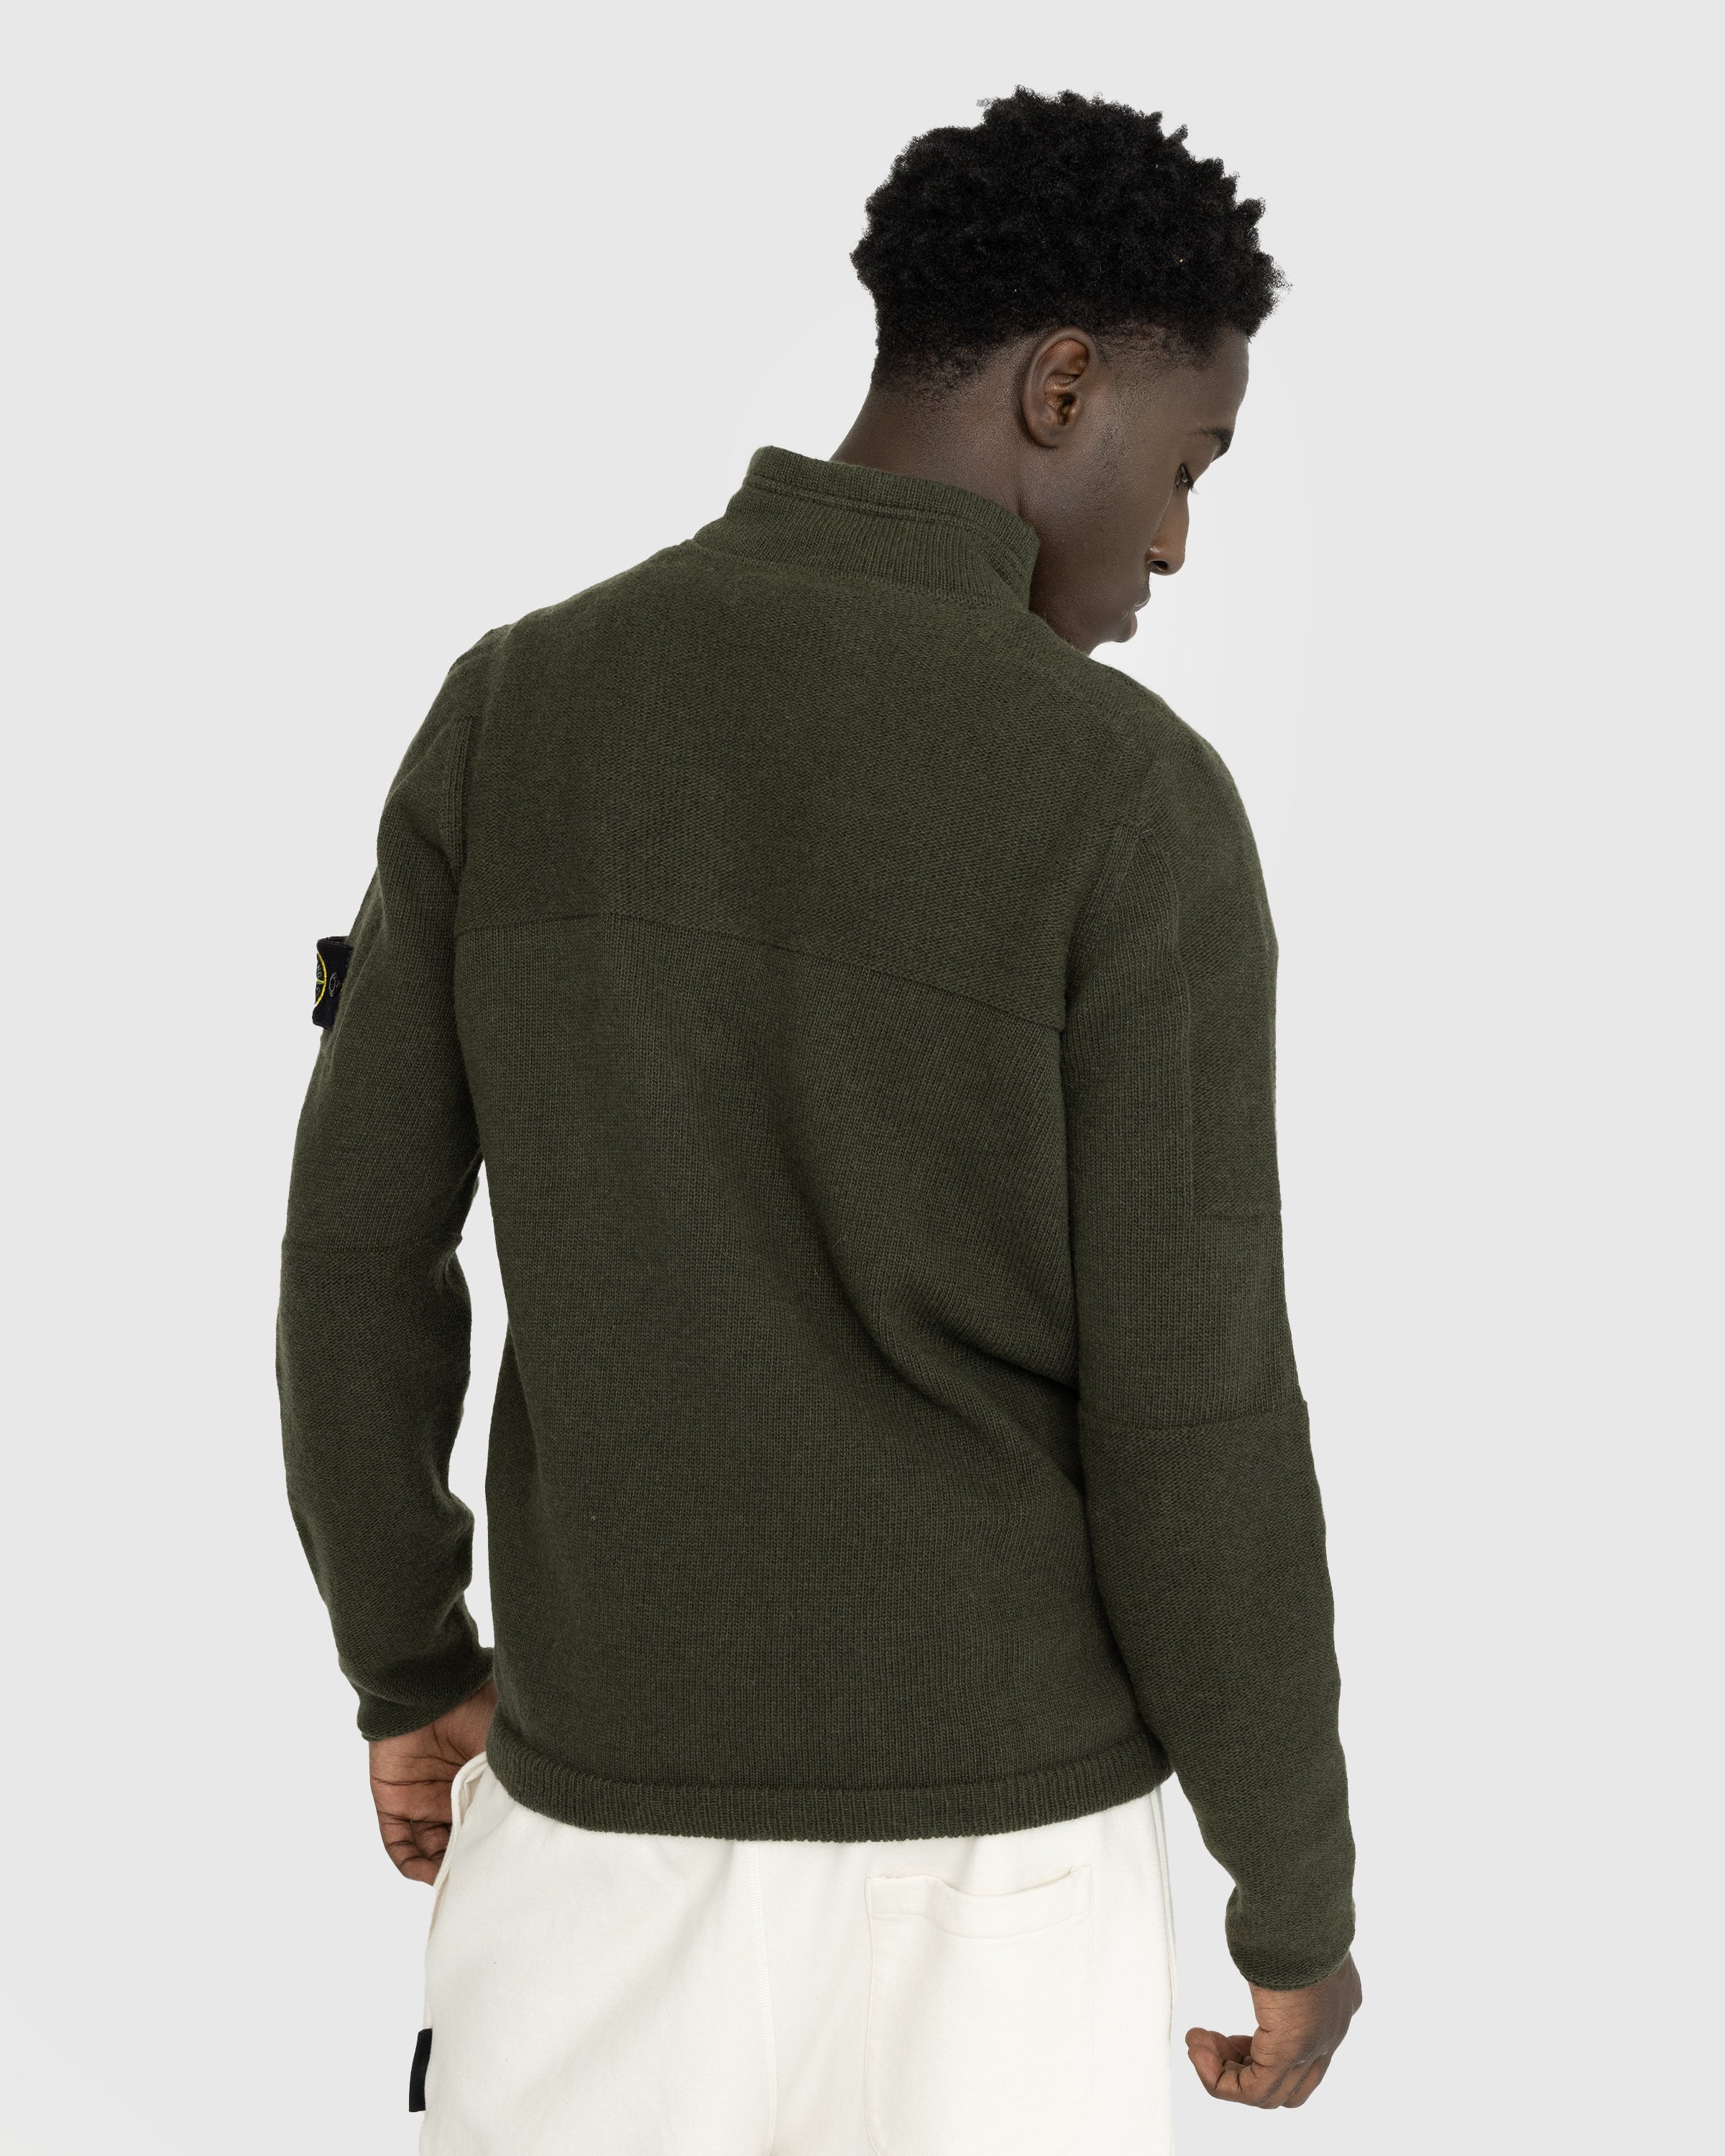 Stone Island - Lambswool Half-Zip Knit Olive - Clothing - Green - Image 3